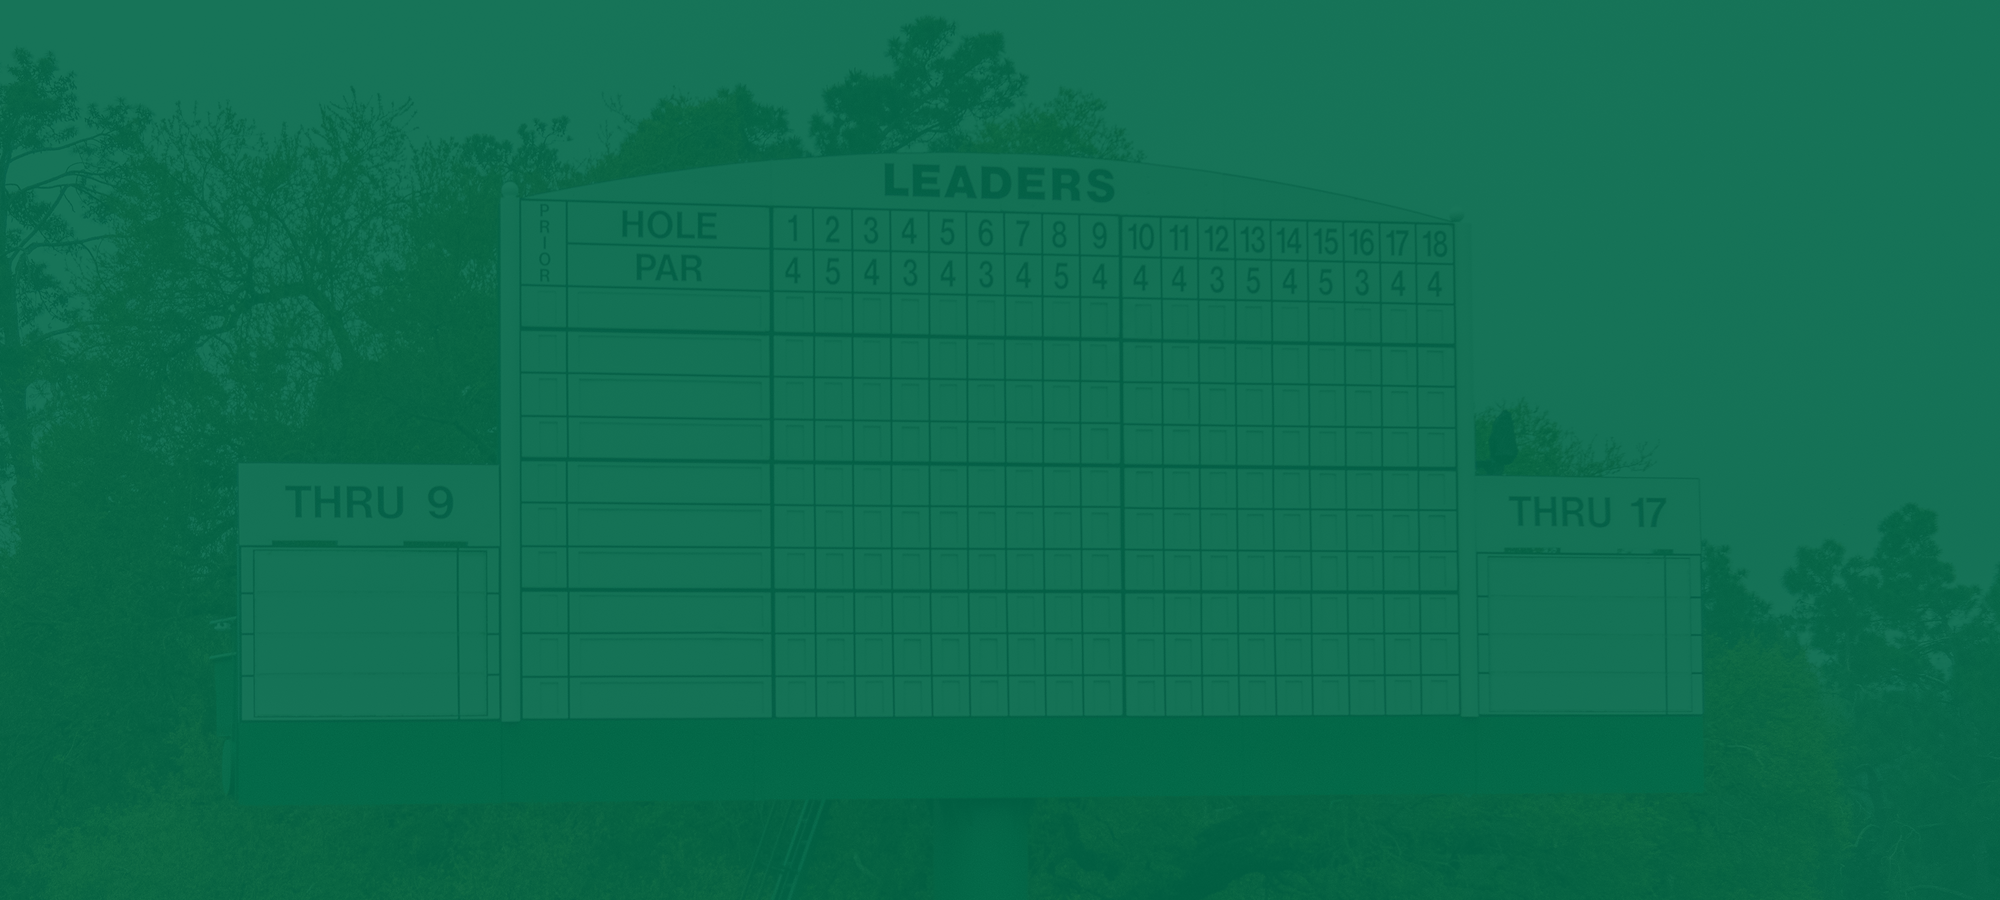 The Masters…. A Tradition Unlike Any Other